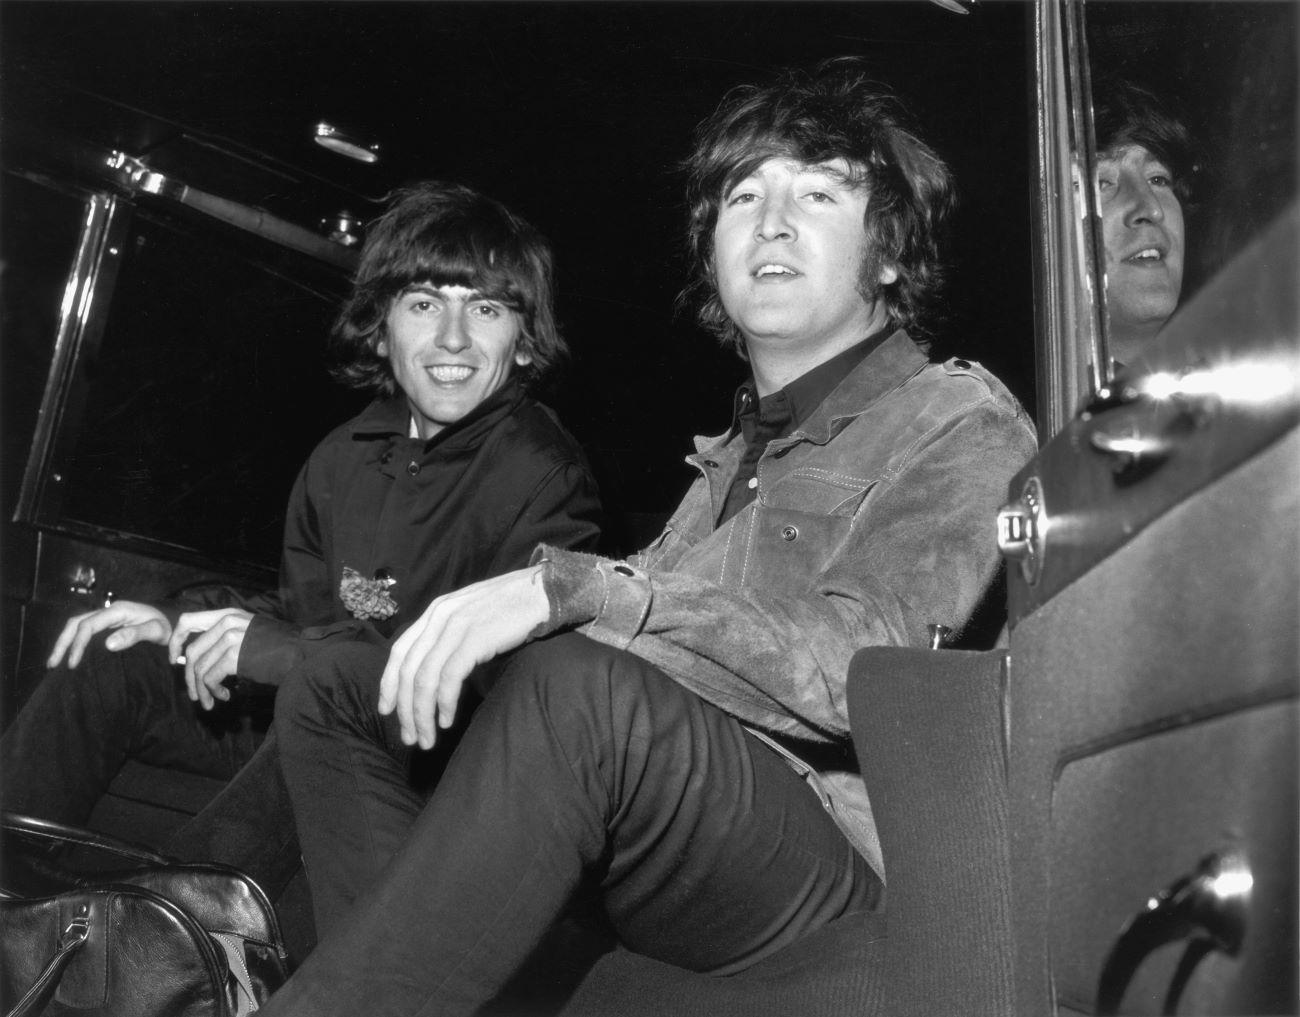 A black and white picture of George Harrison and John Lennon sitting in a car together.